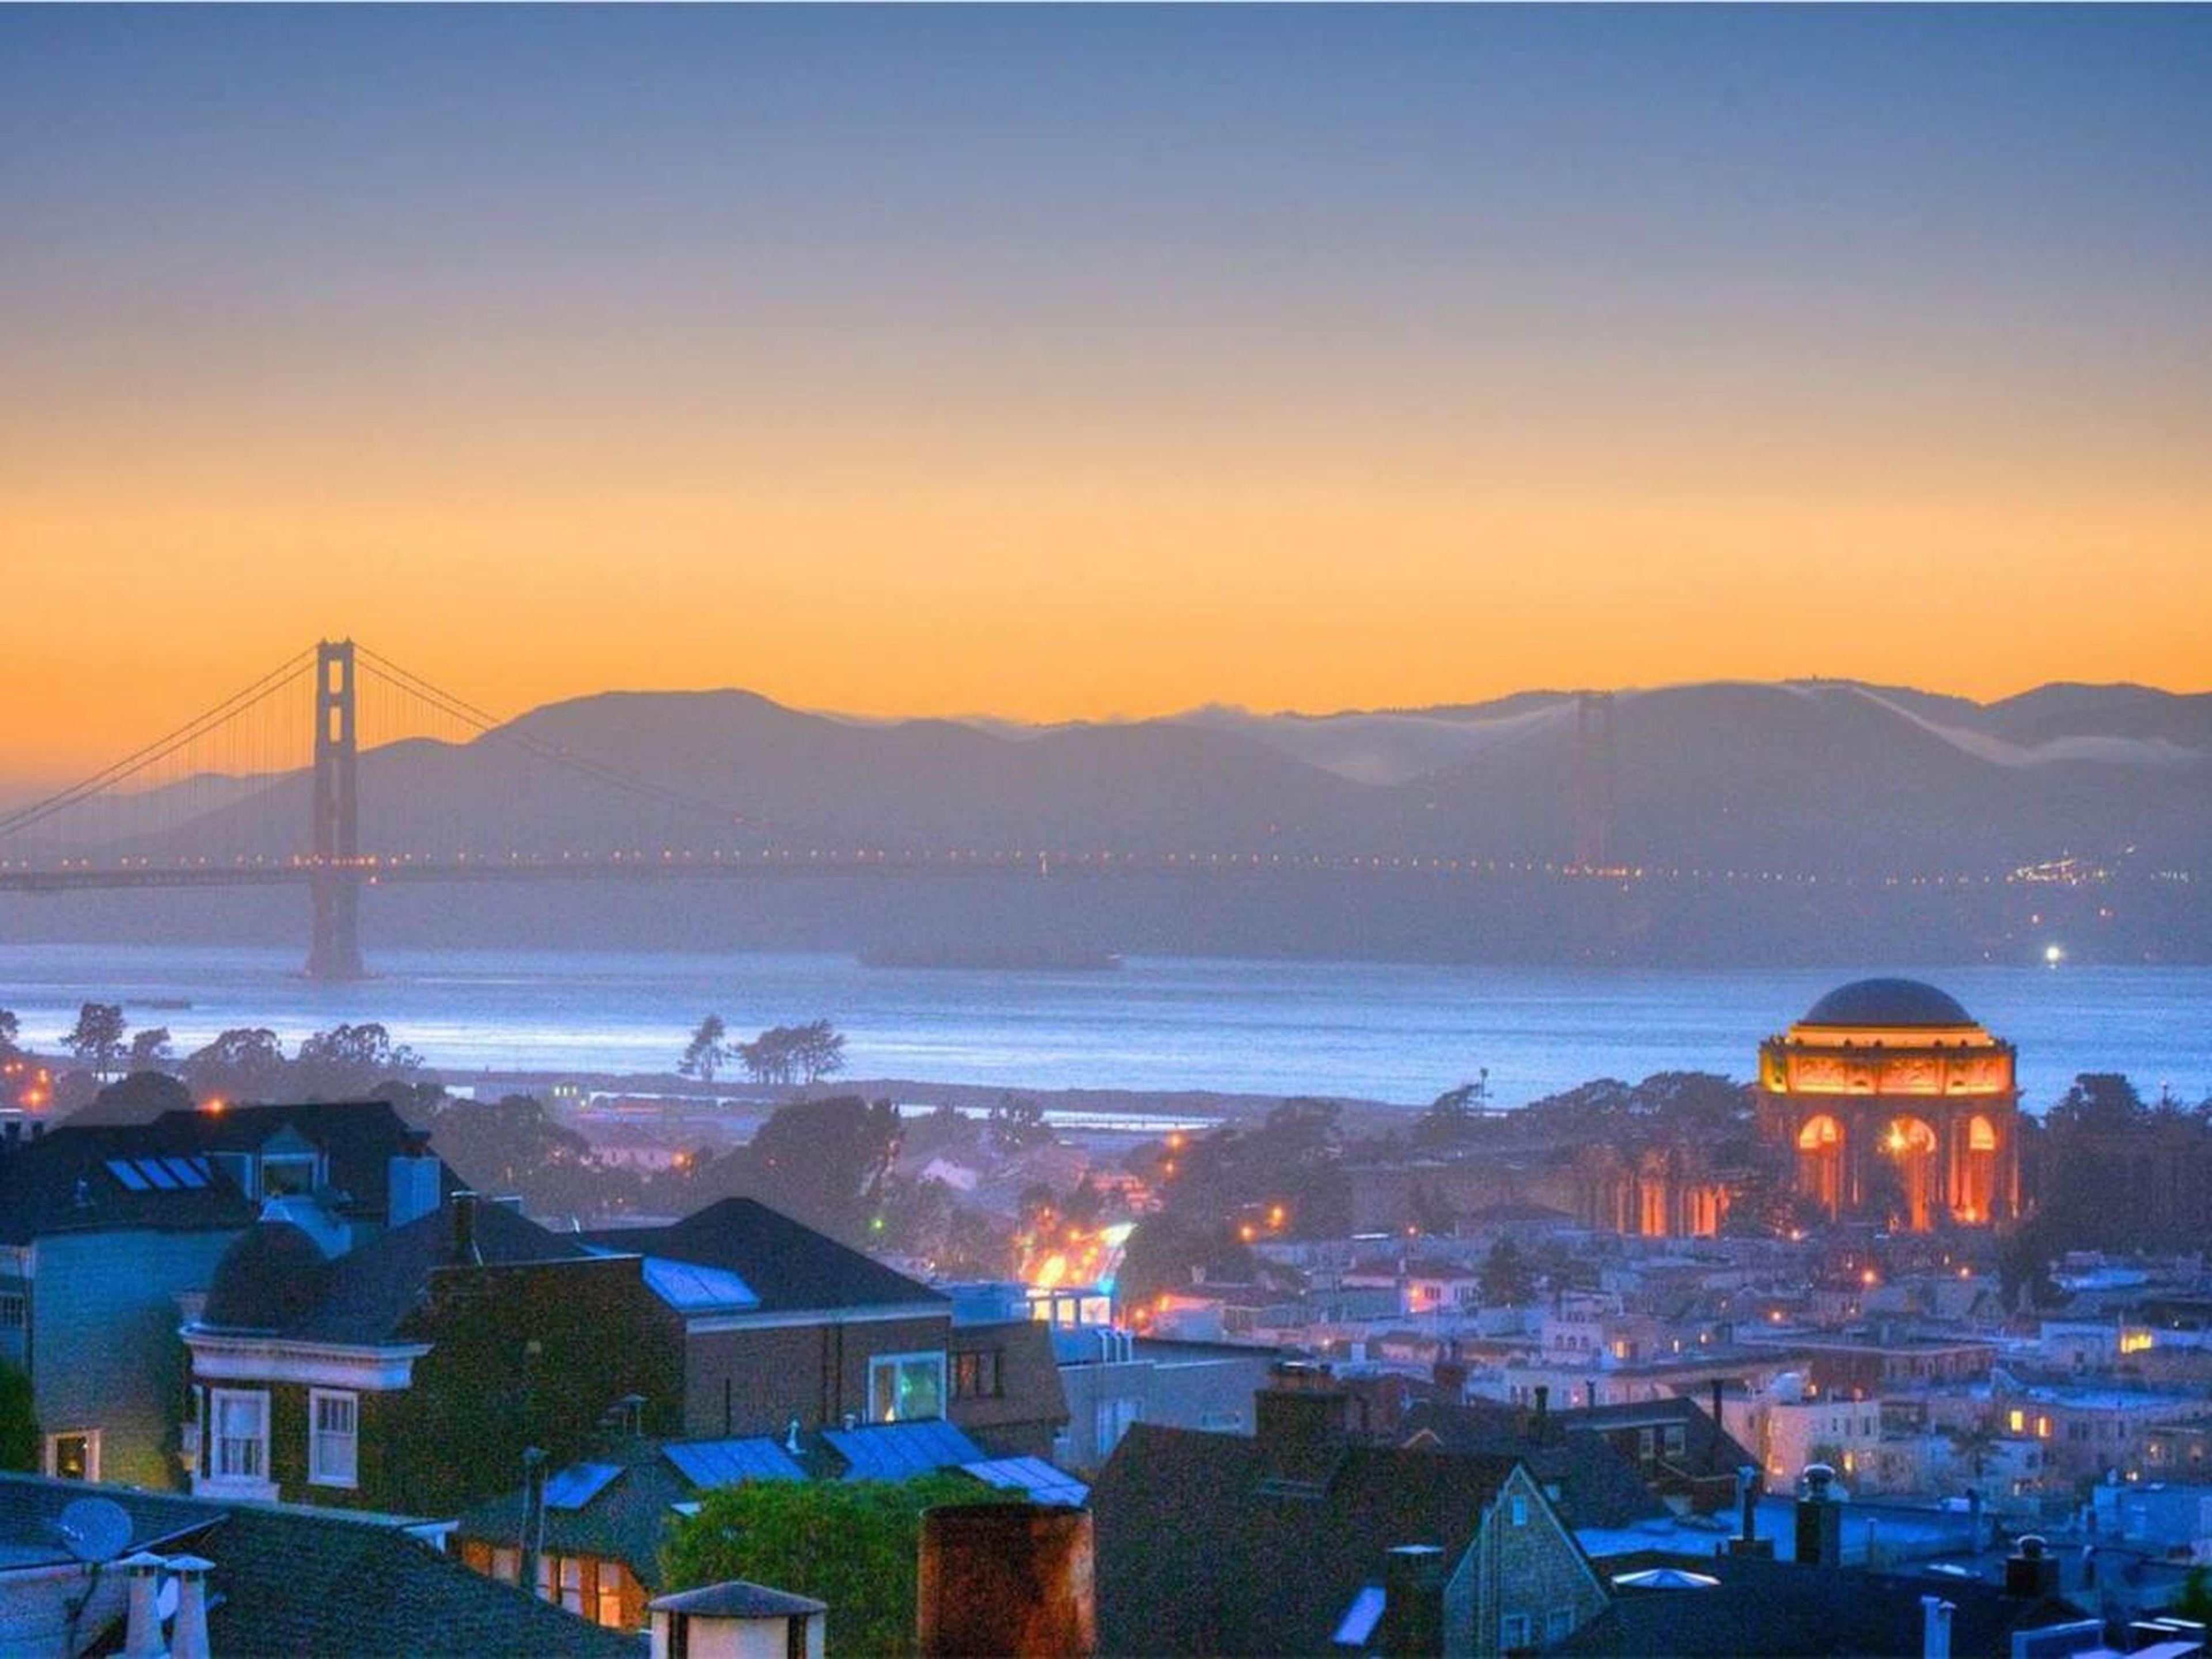 And many of the rooms provide stunning views of San Francisco landmarks, including the Golden Gate Bridge, the Palace of Fine Arts, Alcatraz Island, and Angel Island.